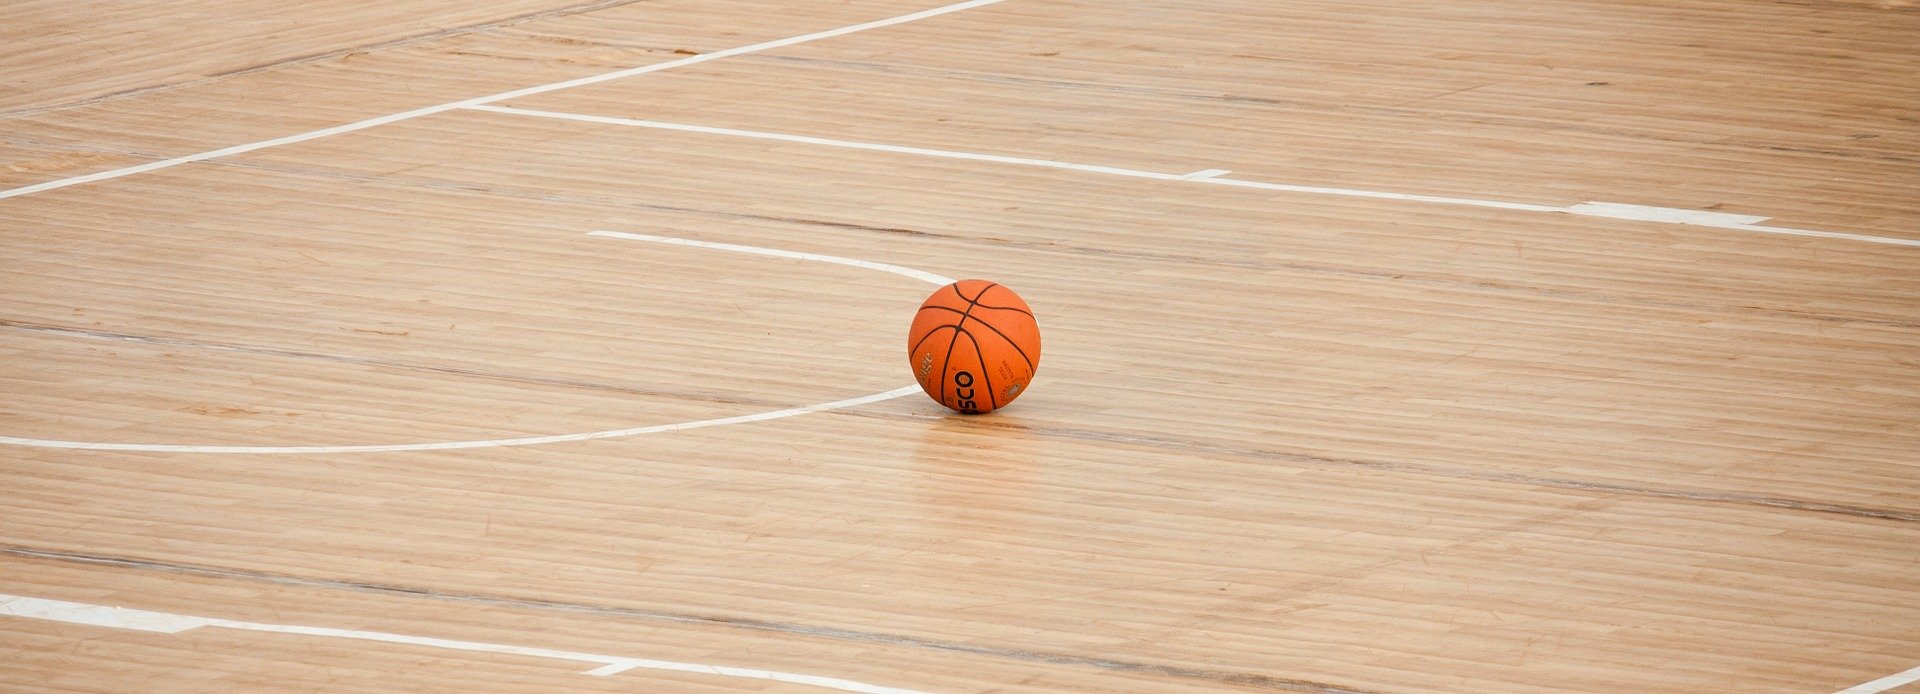 Pictured - A basketball ball on the court | Source: Pixabay